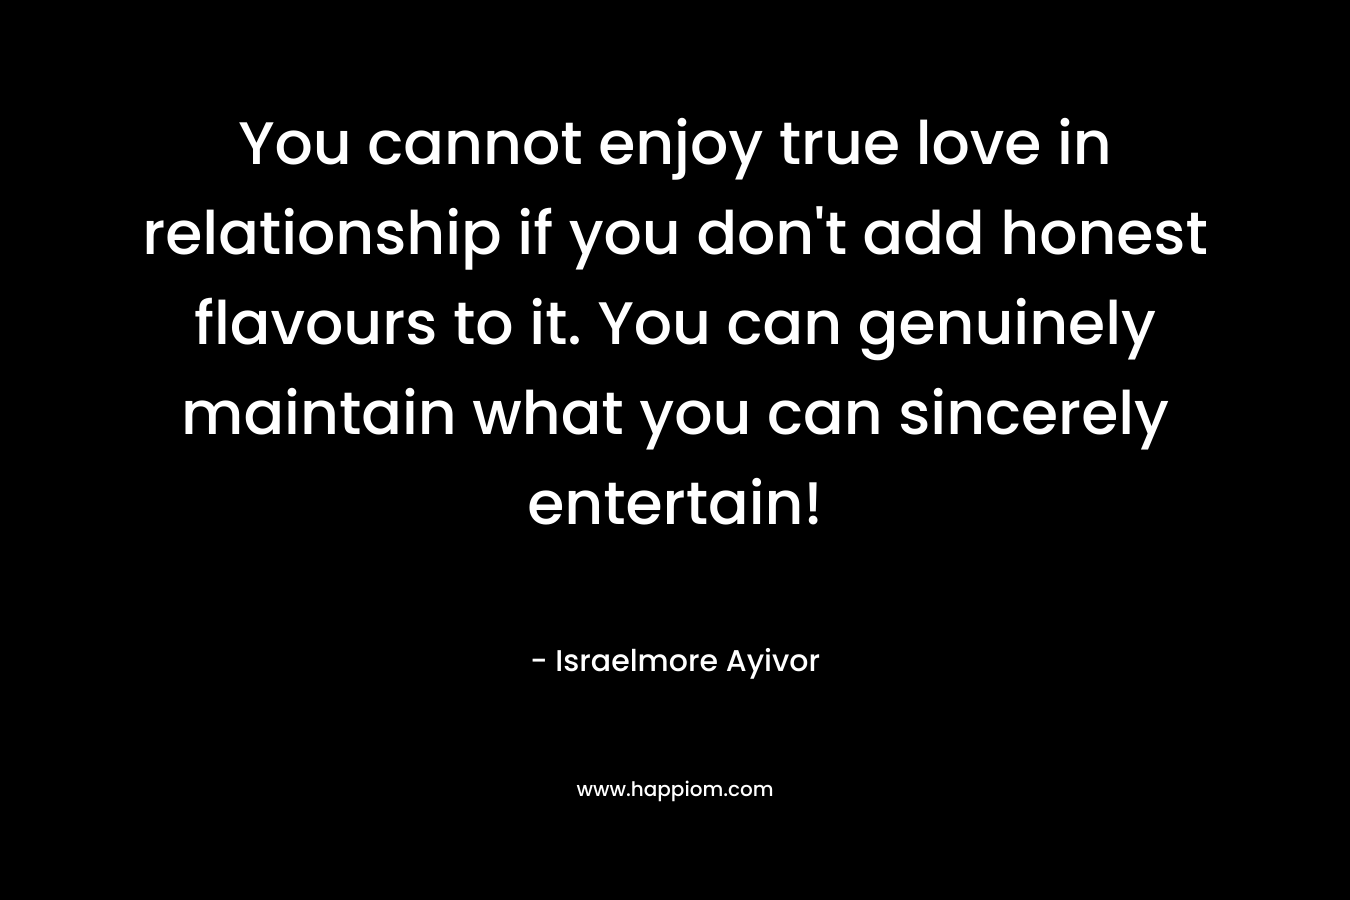 You cannot enjoy true love in relationship if you don't add honest flavours to it. You can genuinely maintain what you can sincerely entertain!